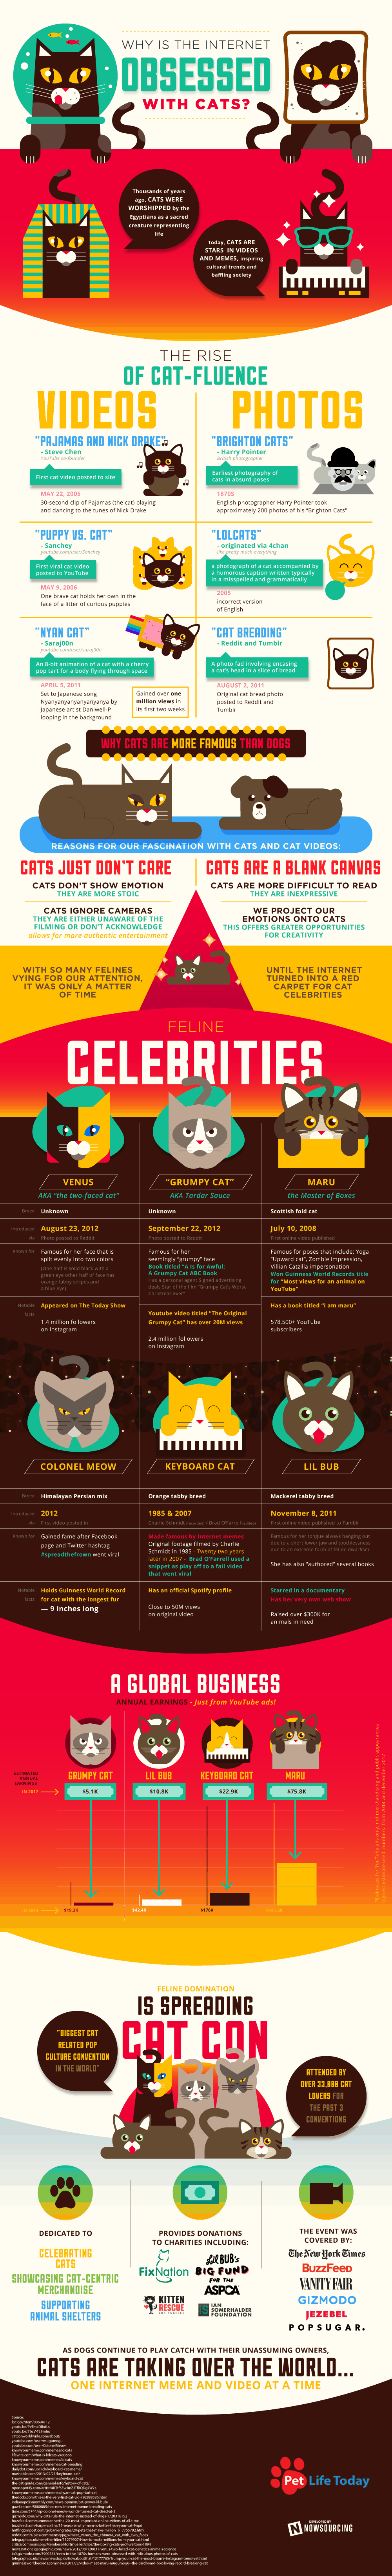 The Internet of Cats [Infographic]